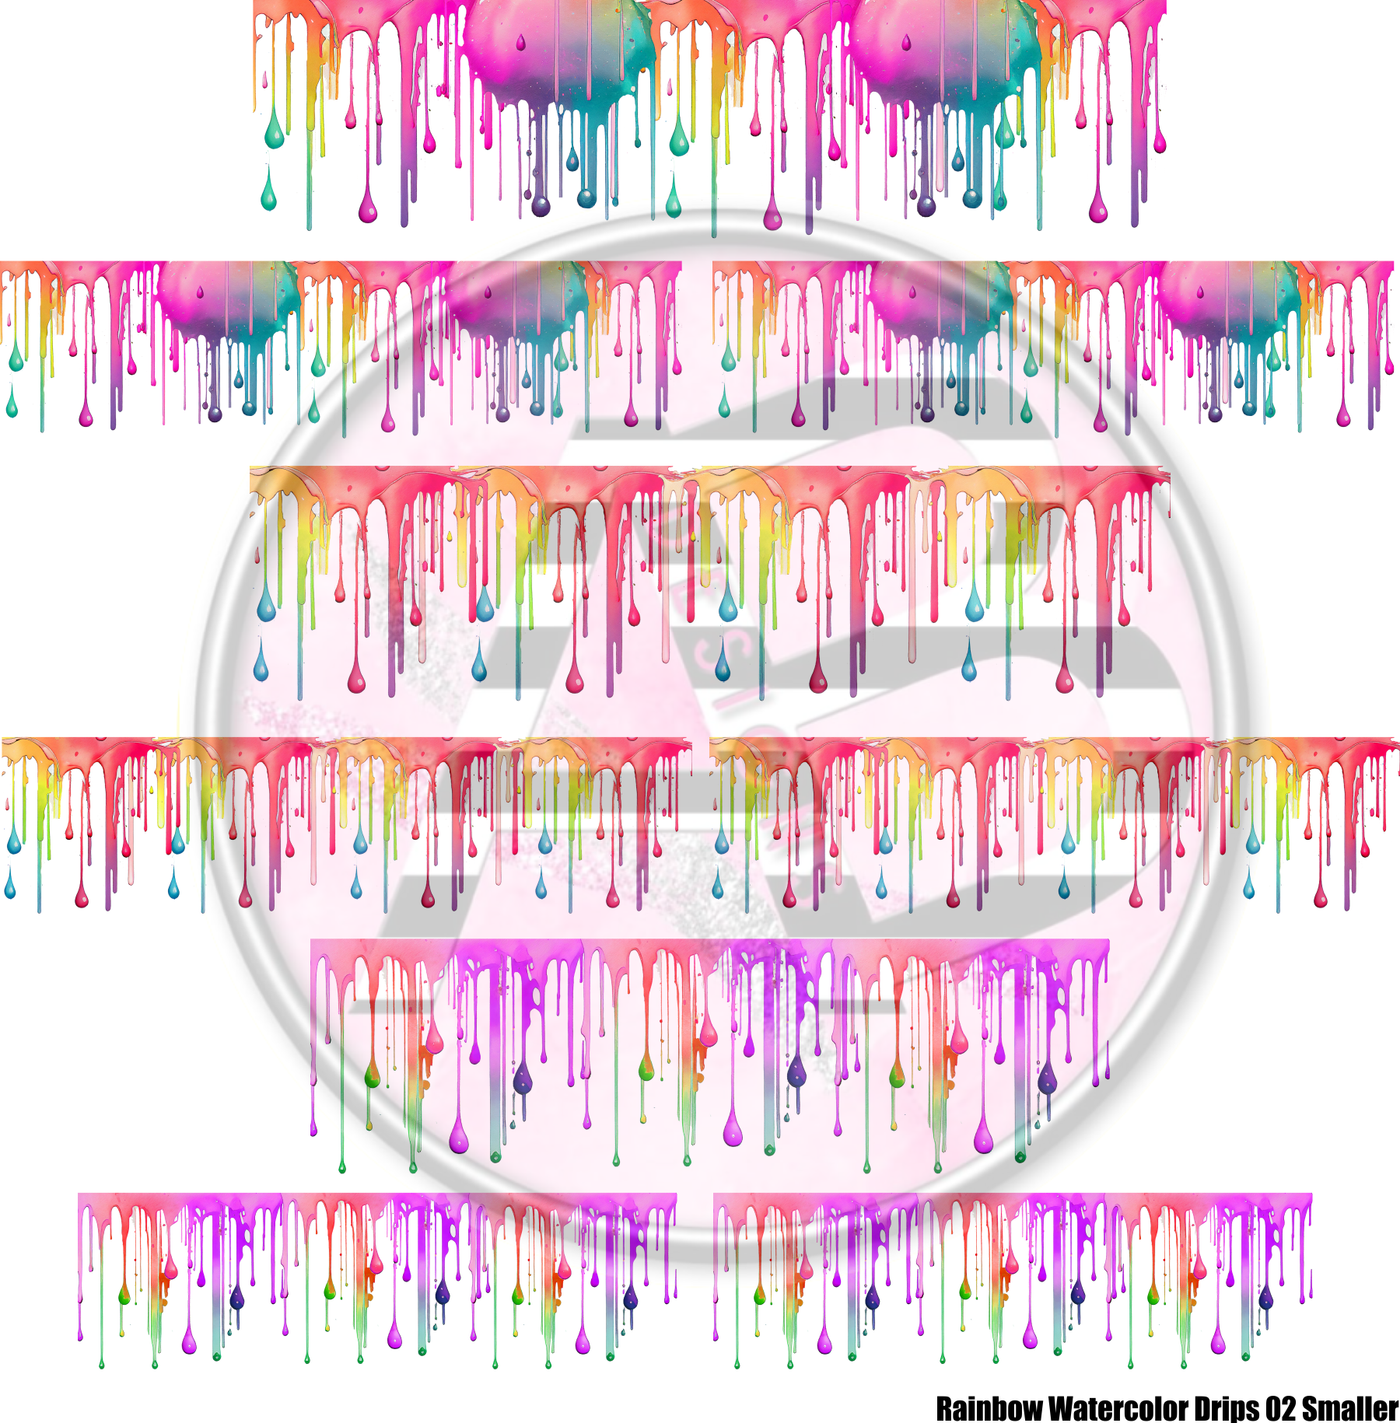 Rainbow Watercolor Drips 02 Smaller Full Sheet 12x12 Clear Cast